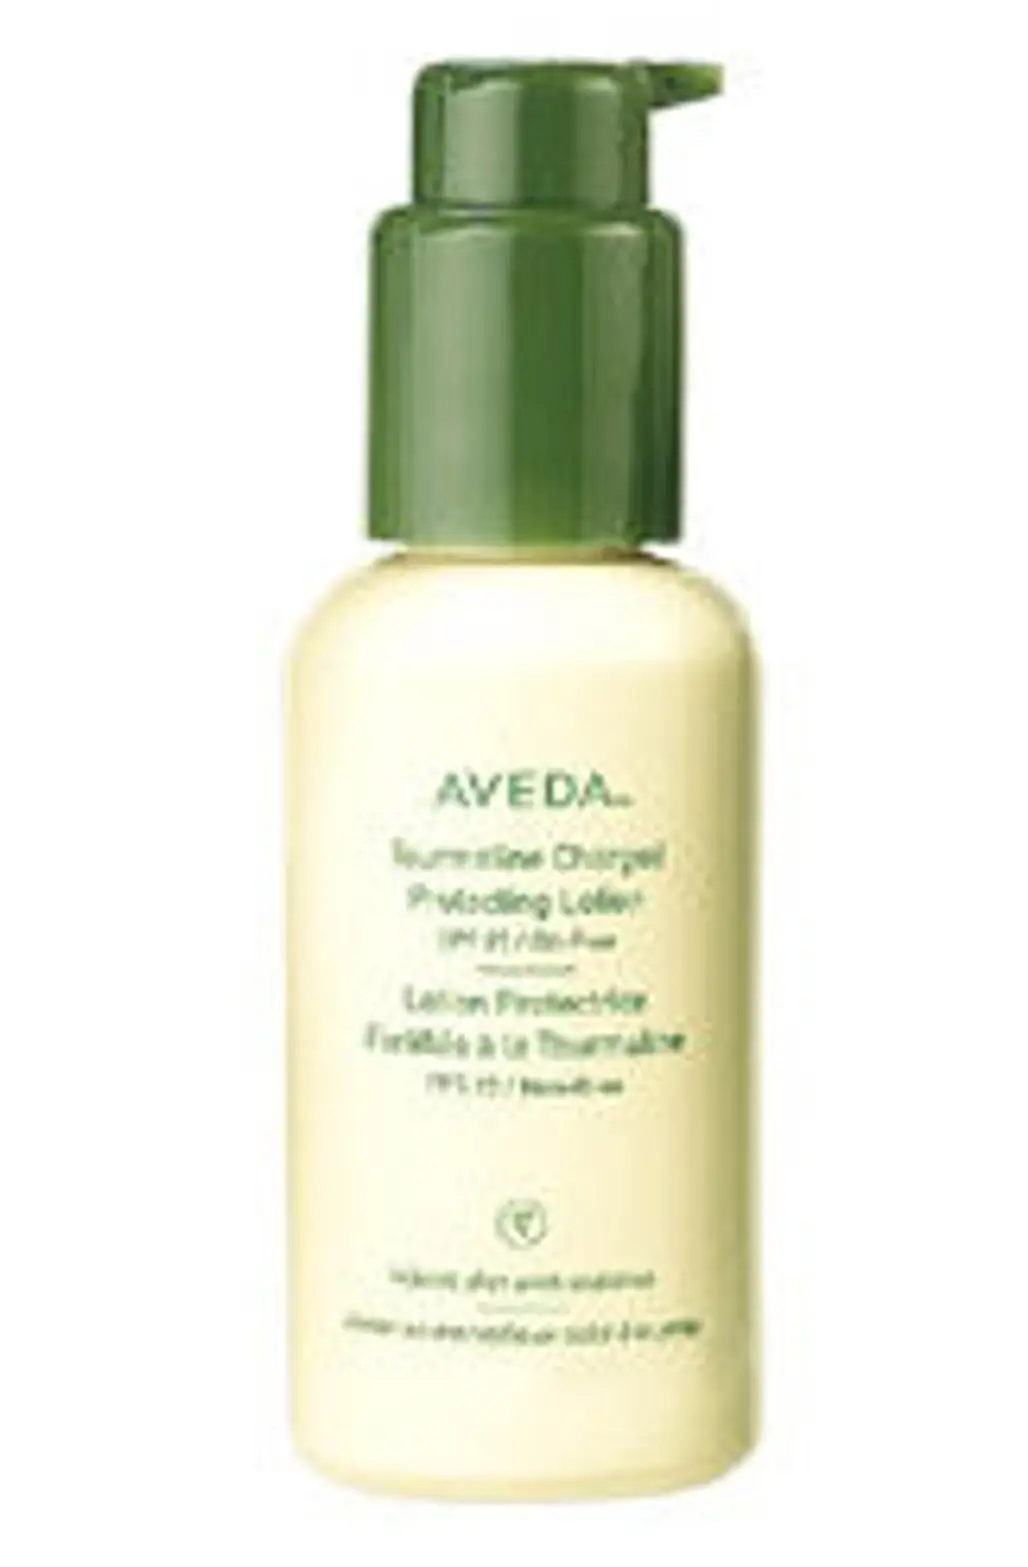 Aveda Tourmaline Charged Protecting Lotion with SPF 15